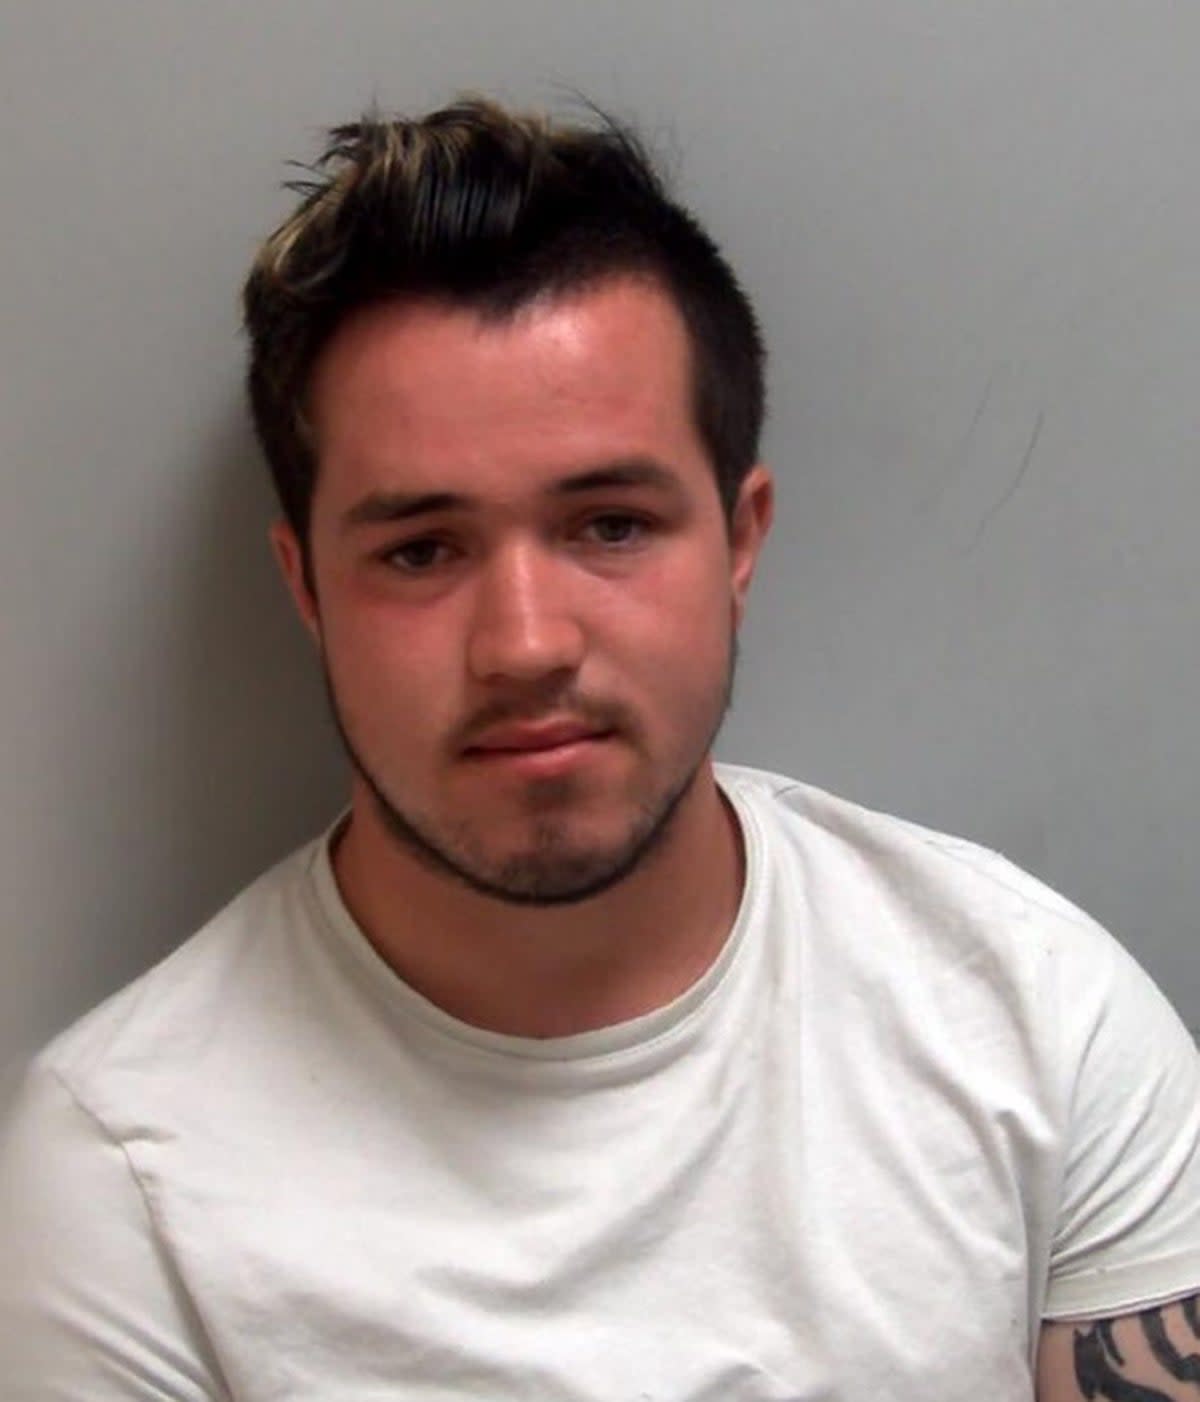 Jay Lang, of Driftway, Basildon, Essex, set up accounts on Snapchat and Instagram under a pseudonym, claiming to be a 16-year-old girl (Essex Police/PA Wire)